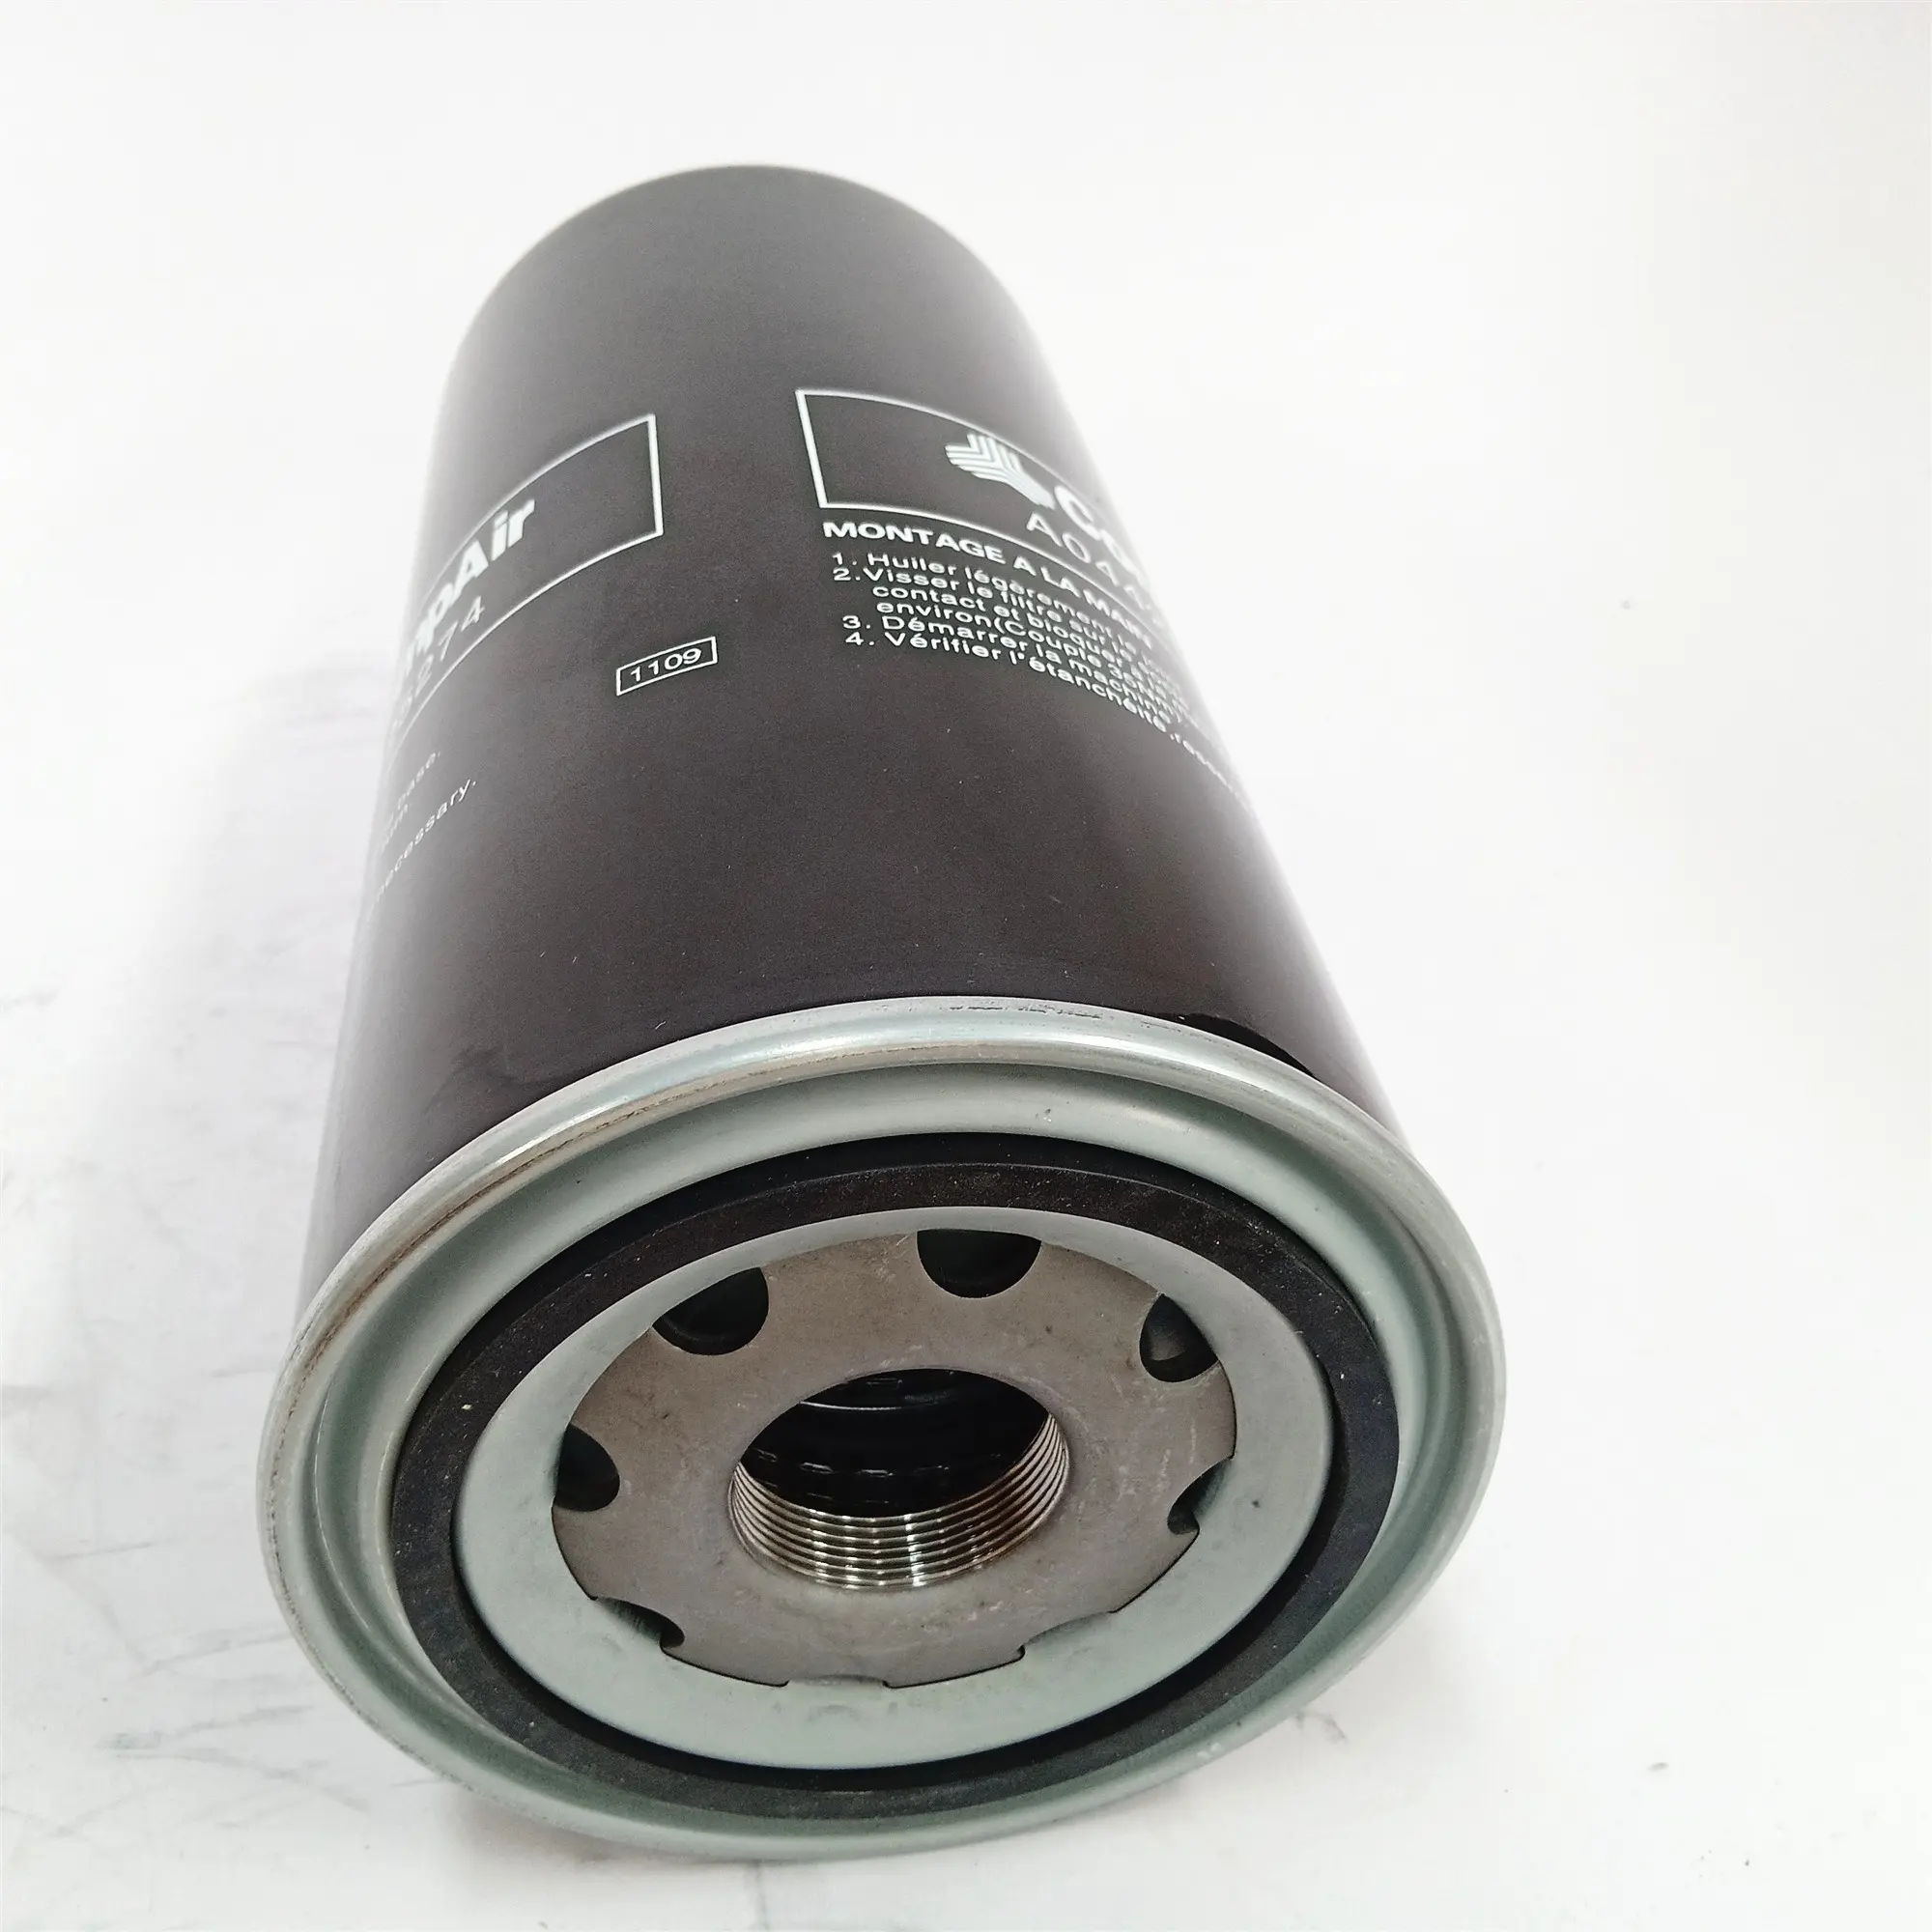 China Factory  OEM  Replacement Compair oil Filter 04425274  Compair  for Compair  Air Compressor Parts